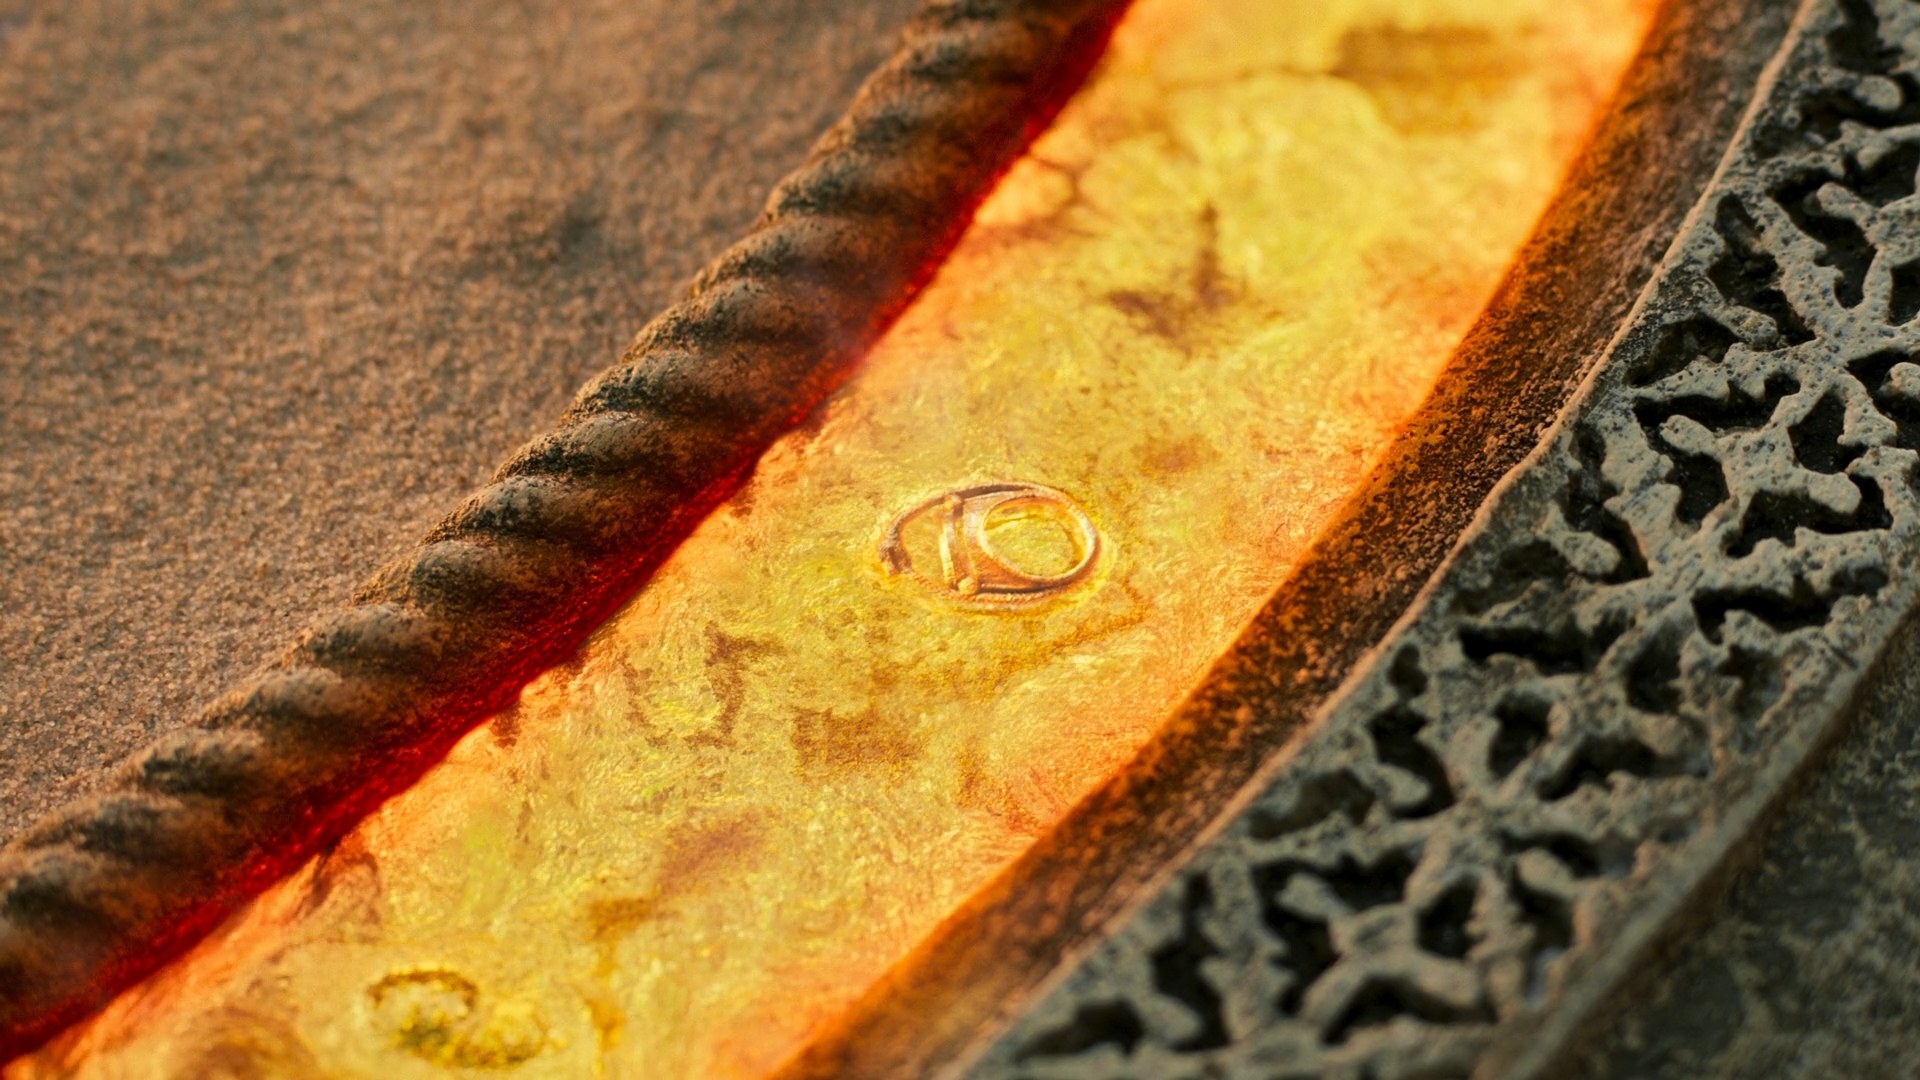 An extreme close-up of a pool of molten gold – an Aes Sedai ring with the gemstone removed, has been dropped into it, and is melting into the pool.